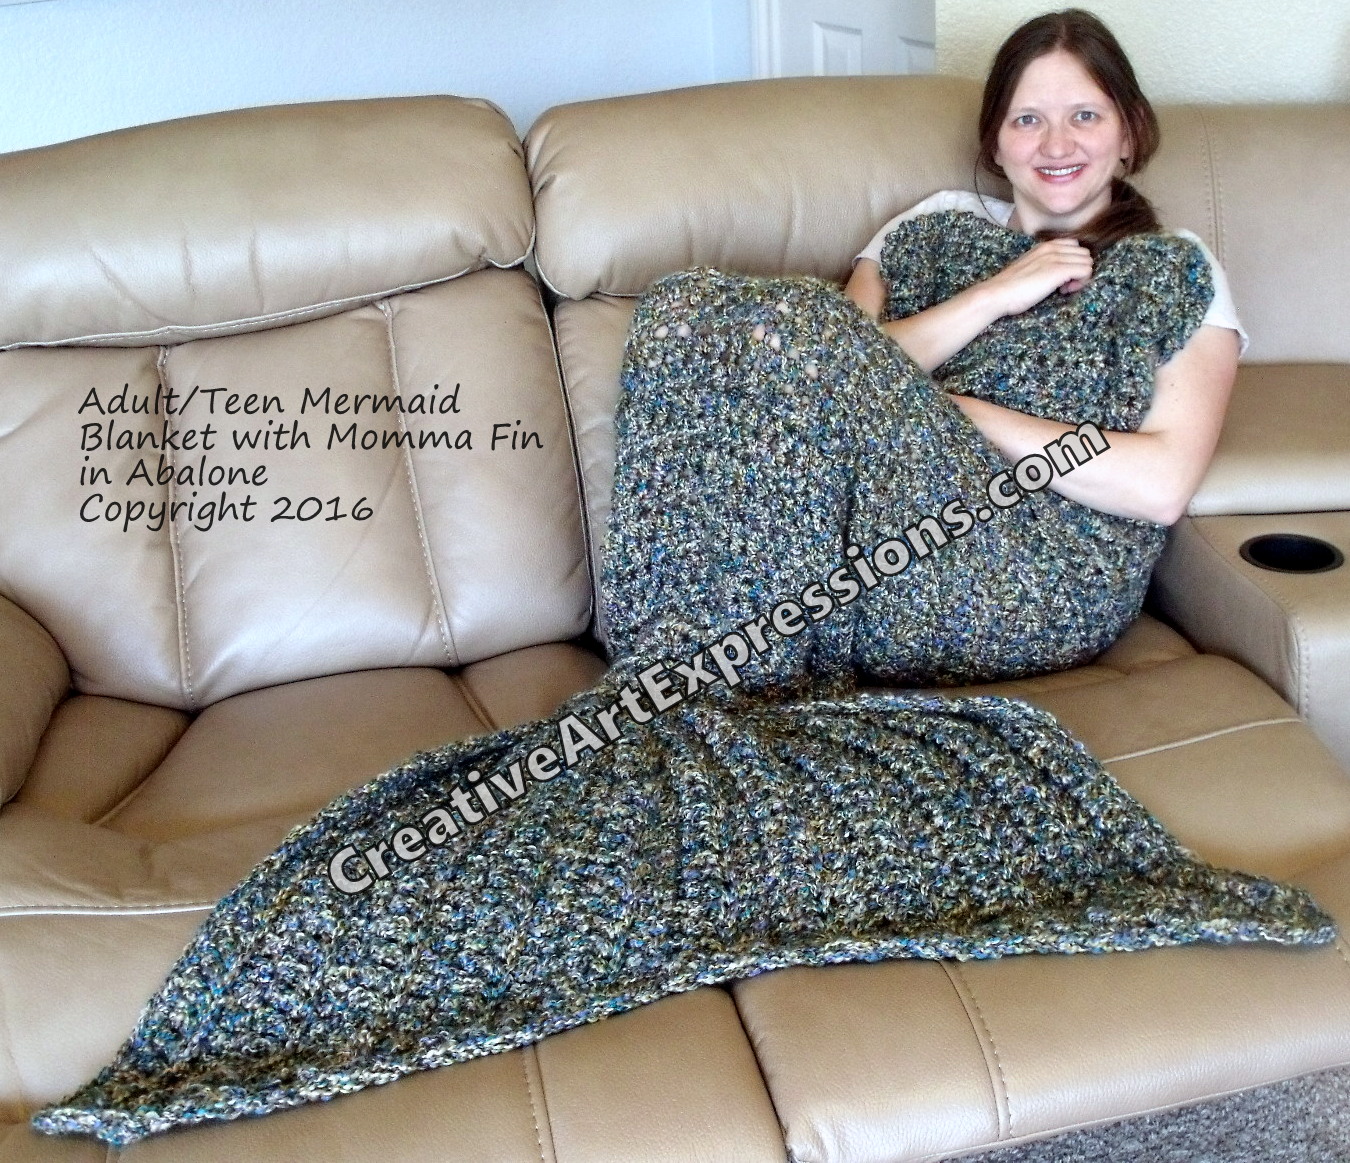 Mermaid Blanket Adult Teen with Mama Fin in Abalone